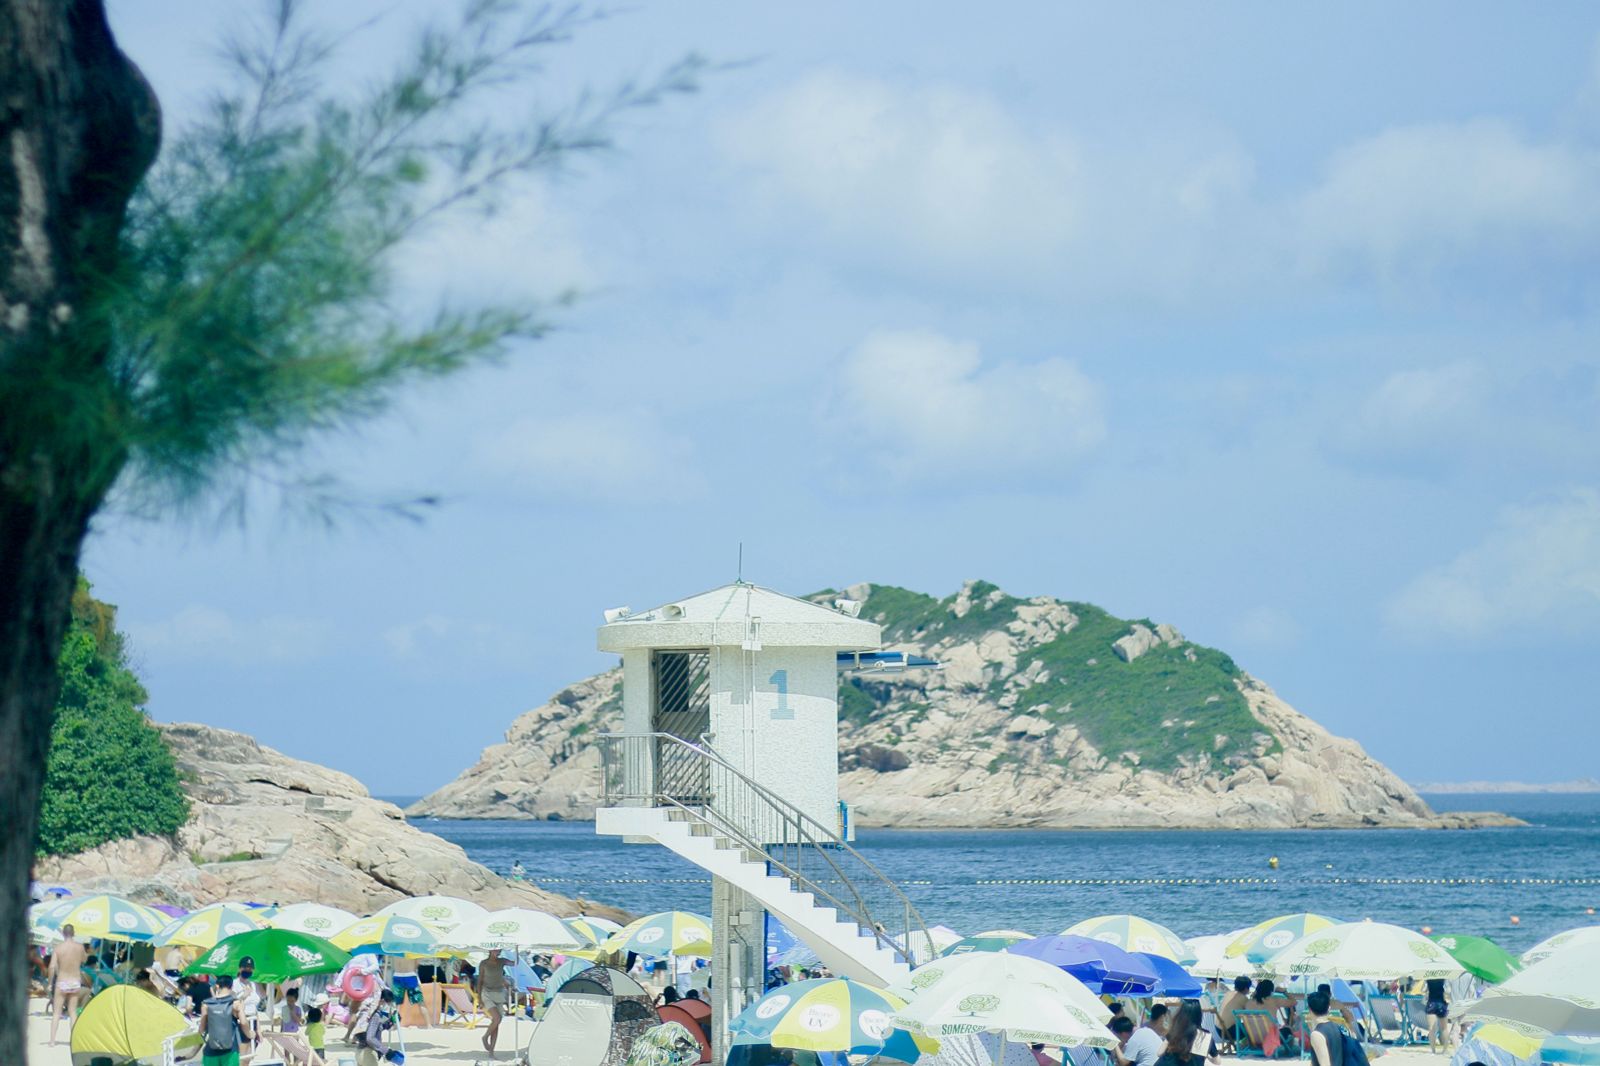 Sunday Shek O is always in a crowded vibe